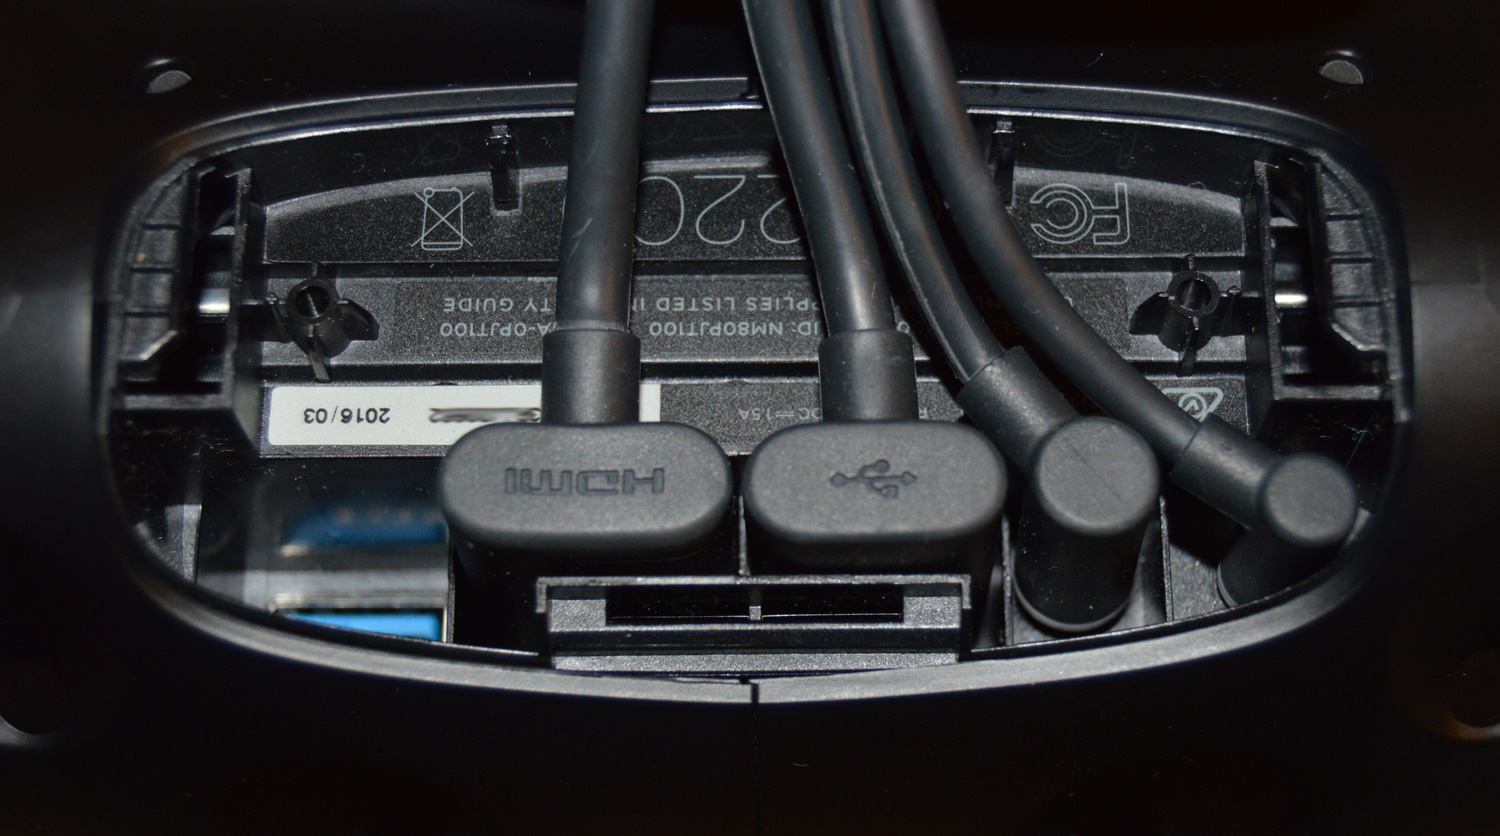 The ports on the front of the headset.